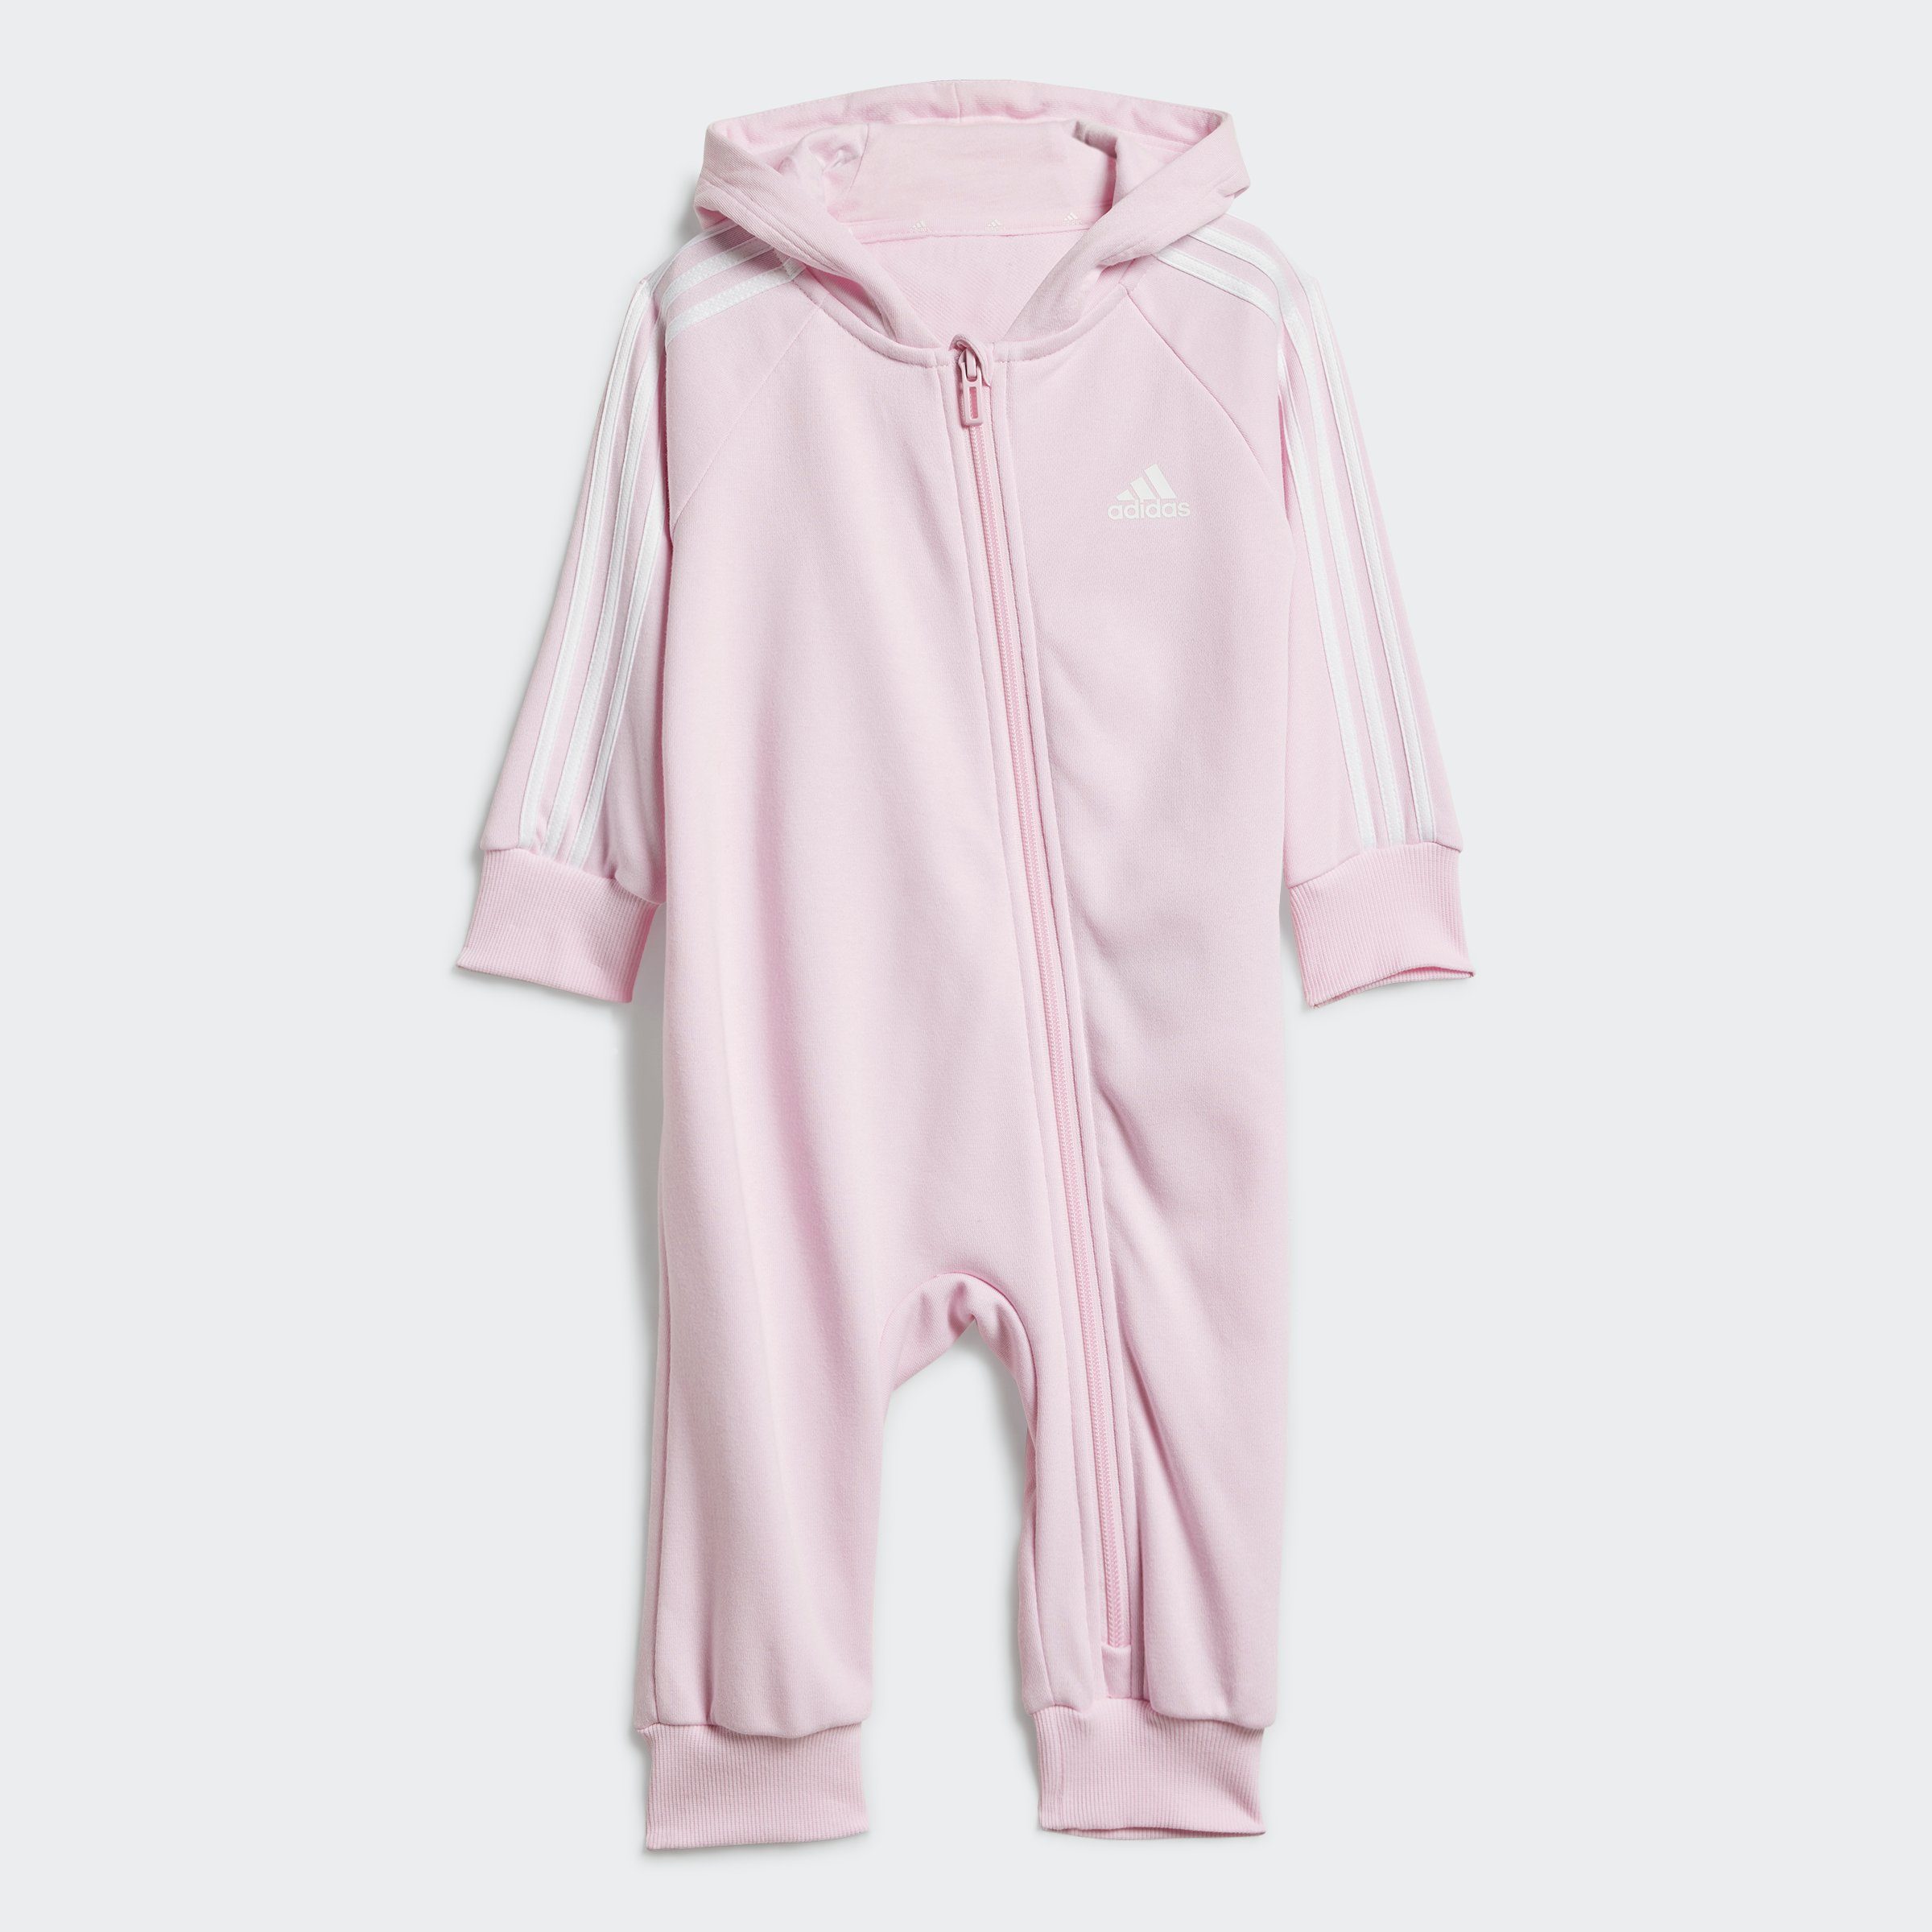 adidas Sportswear Overall I 3S FT ONESIE Clear Pink / White